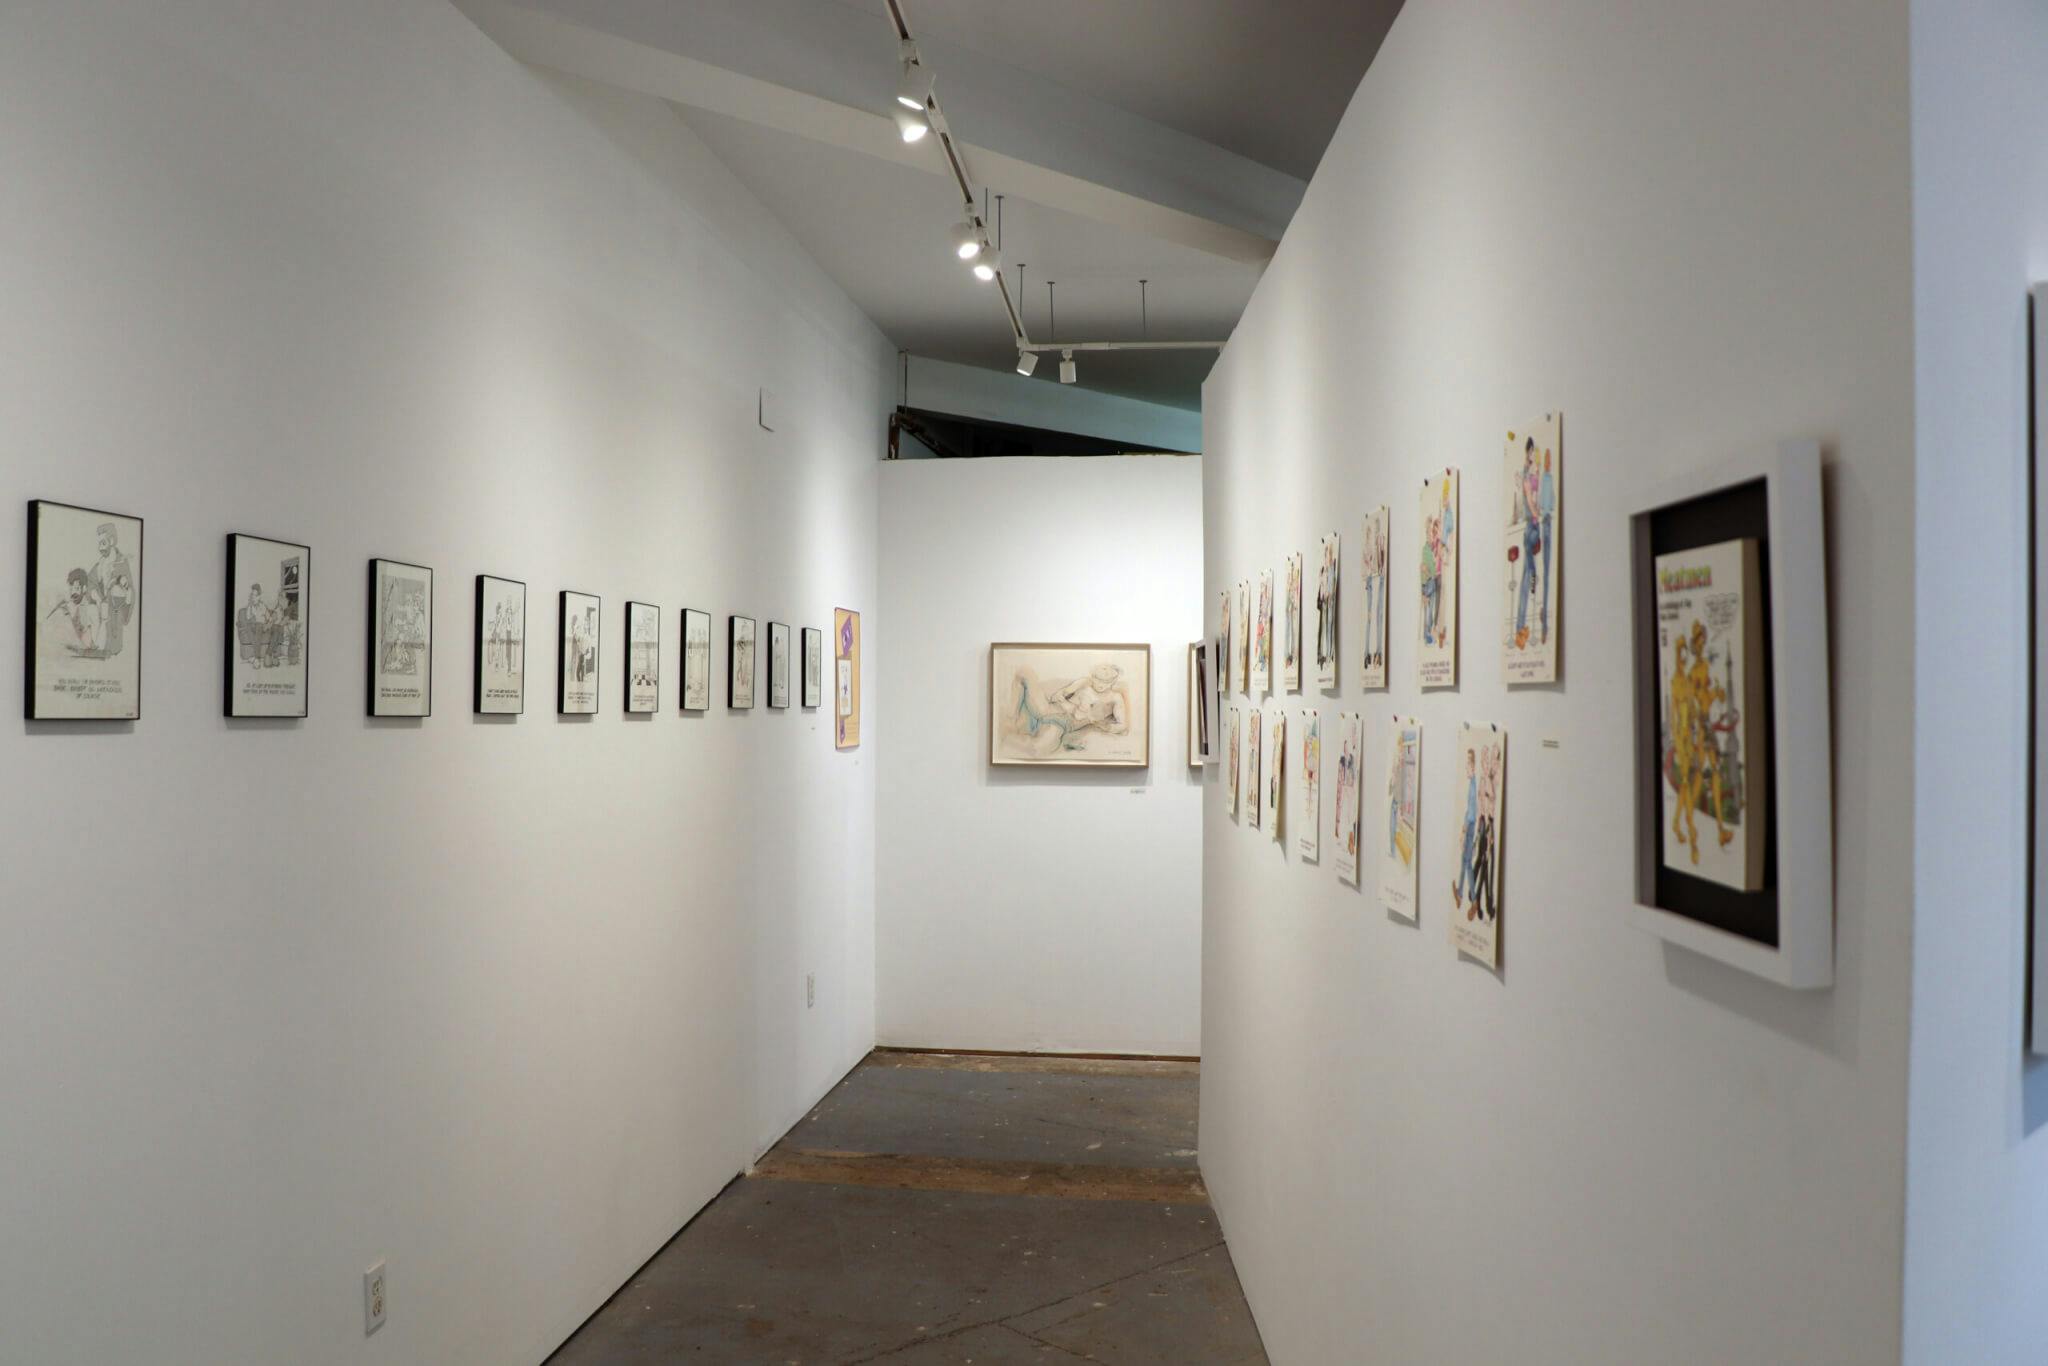 Installation view of “DONELAN: Drawing on the Gay Experience" at Jameson & Thompson Picture Framers